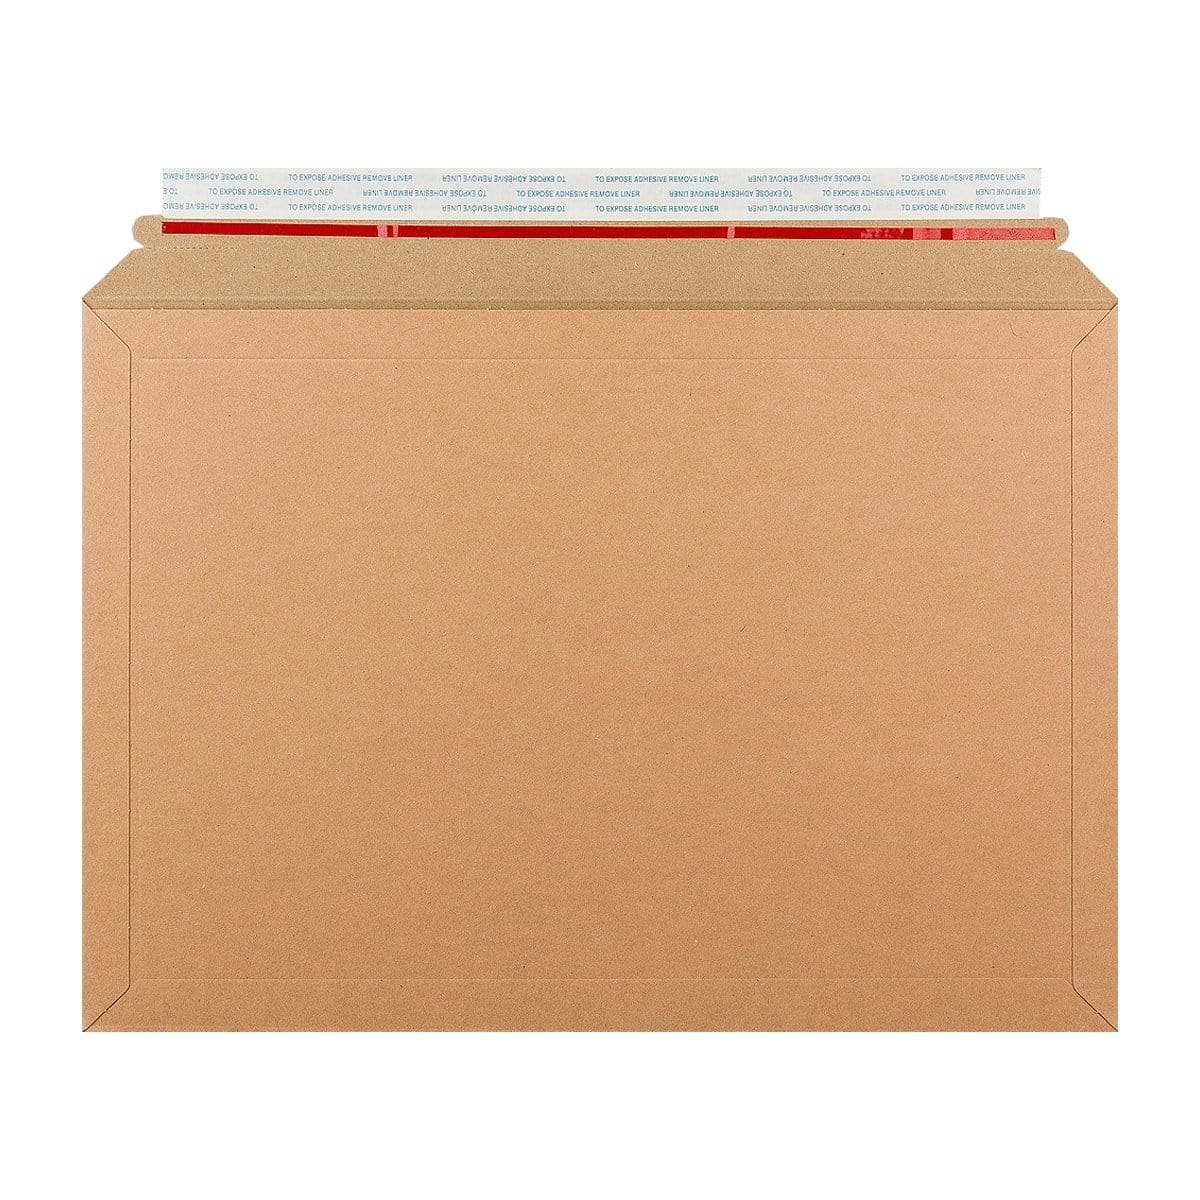 products/rigid-carboard-envelopes-249x352.jpg